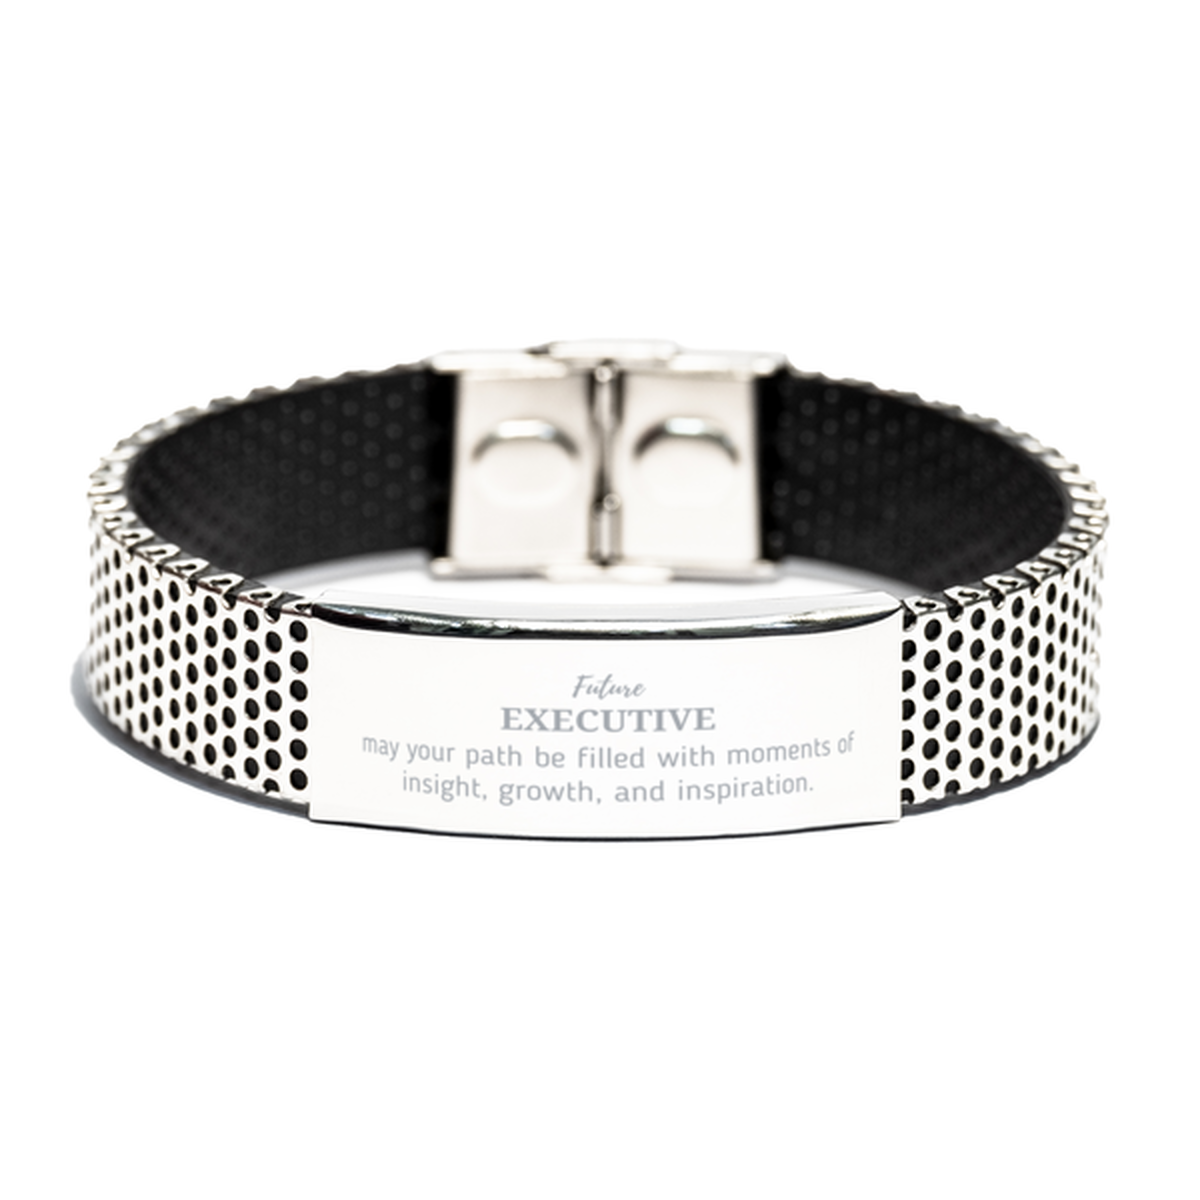 Future Executive Gifts, May your path be filled with moments of insight, Graduation Gifts for New Executive, Christmas Unique Stainless Steel Bracelet For Men, Women, Friends